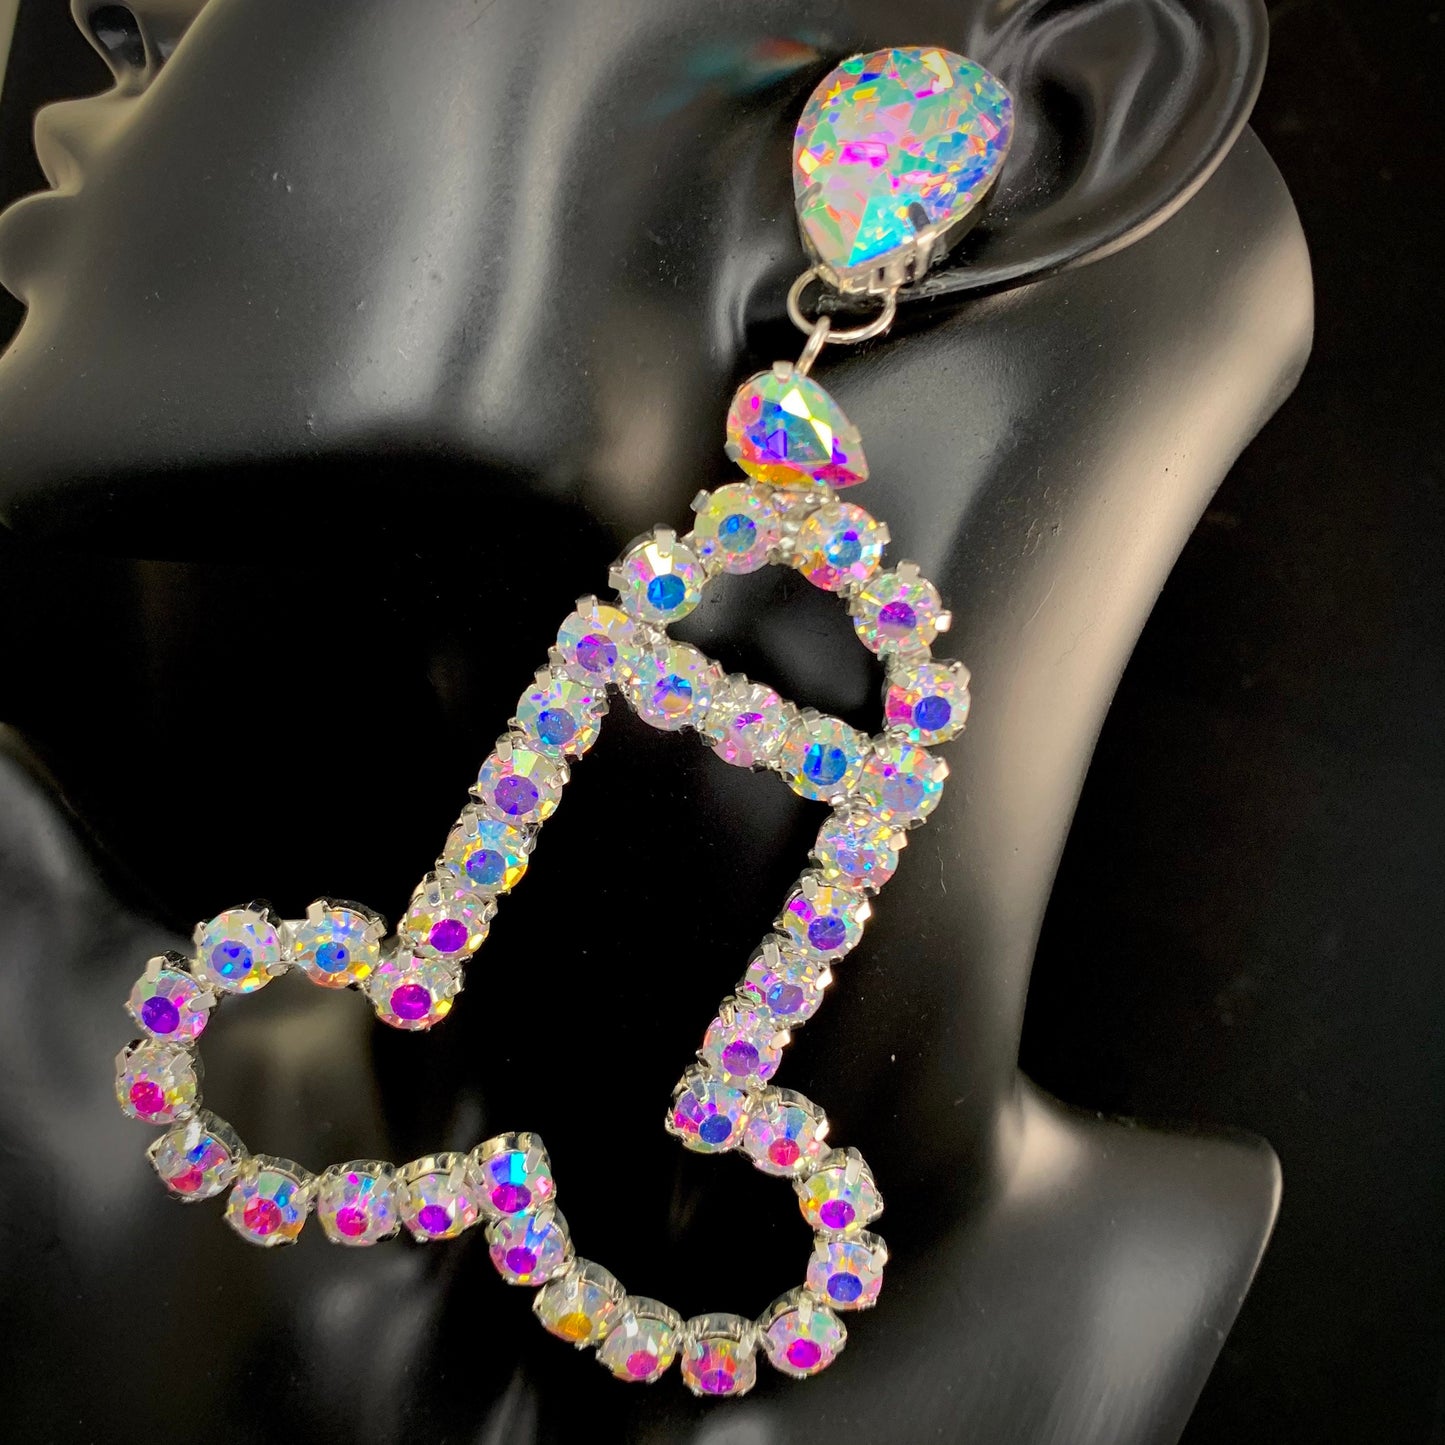 Penis / Willy Earrings / Sparkling Clip on or Pierced / Gift / Drag Queen Jewelry / Costume Jewellery